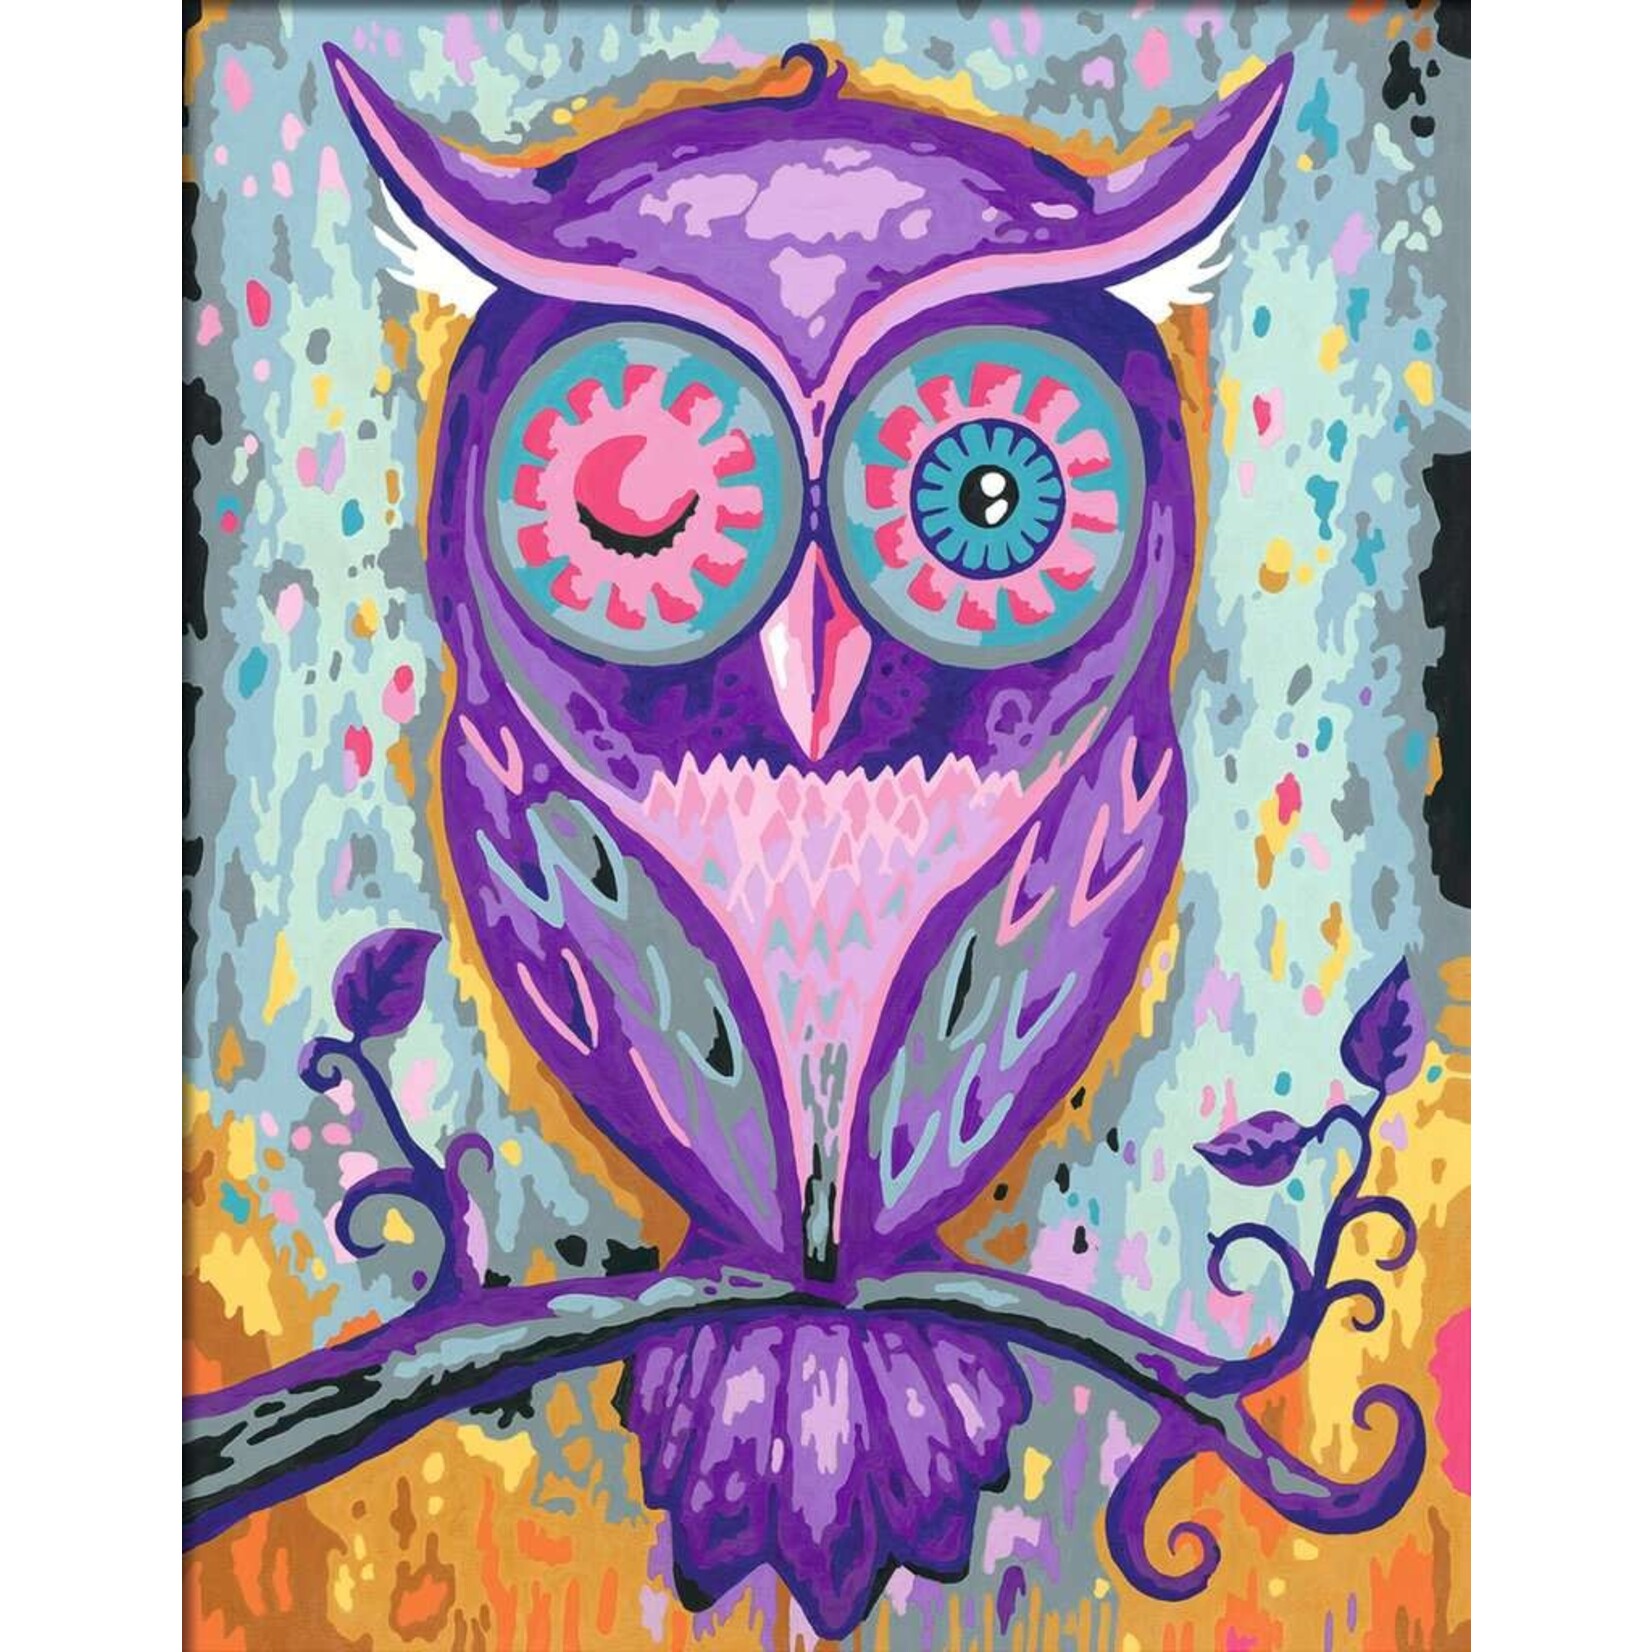 CreArt: Dreaming Owl 10x12 Paint by Number